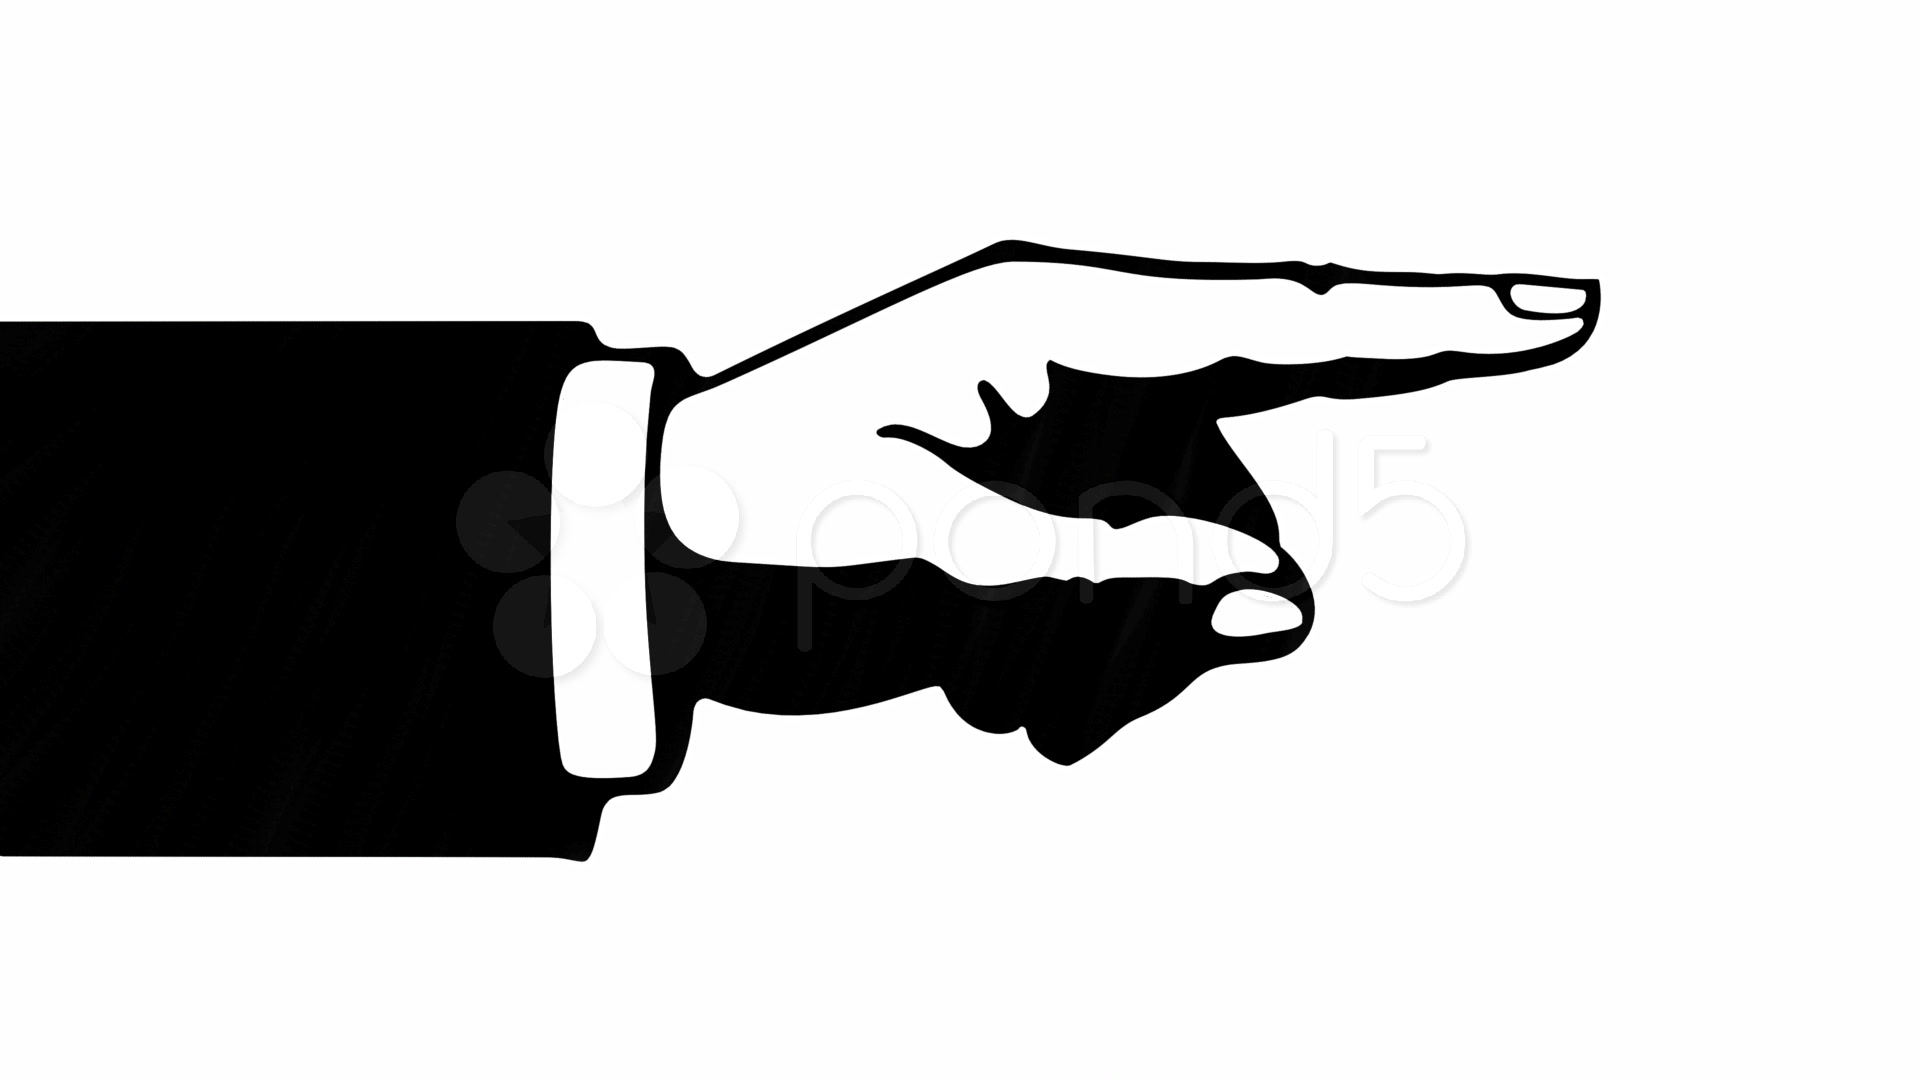 Pointing hand vector.